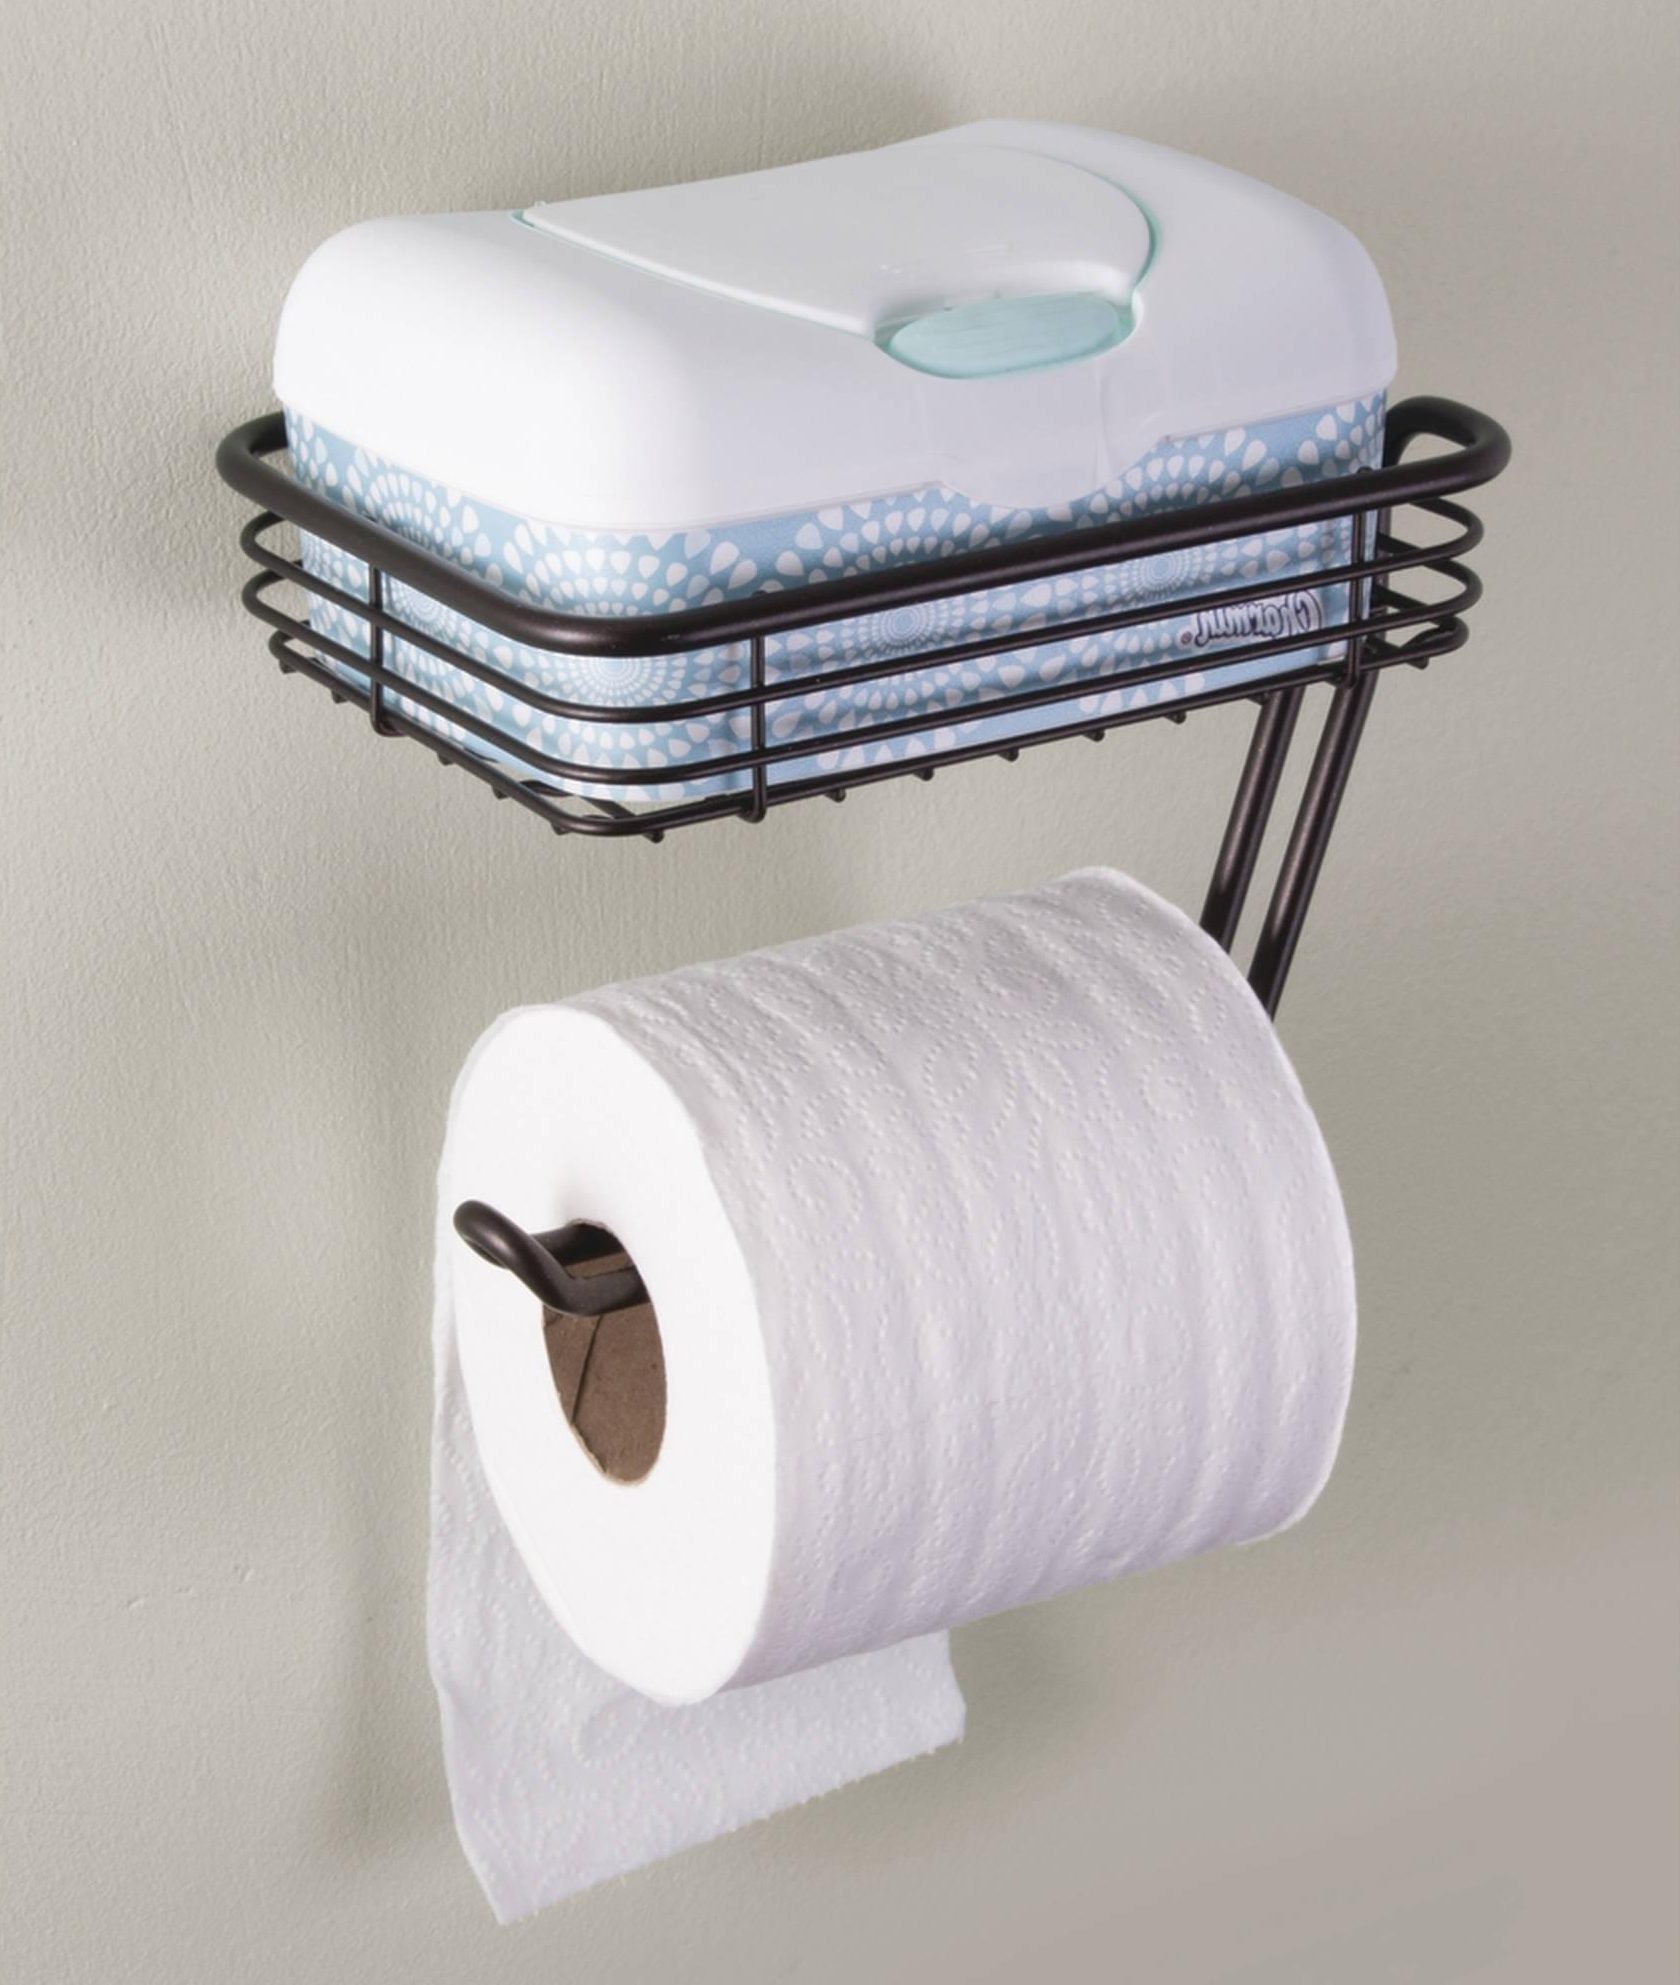 Low-Budget-Toilet-Paper-holder